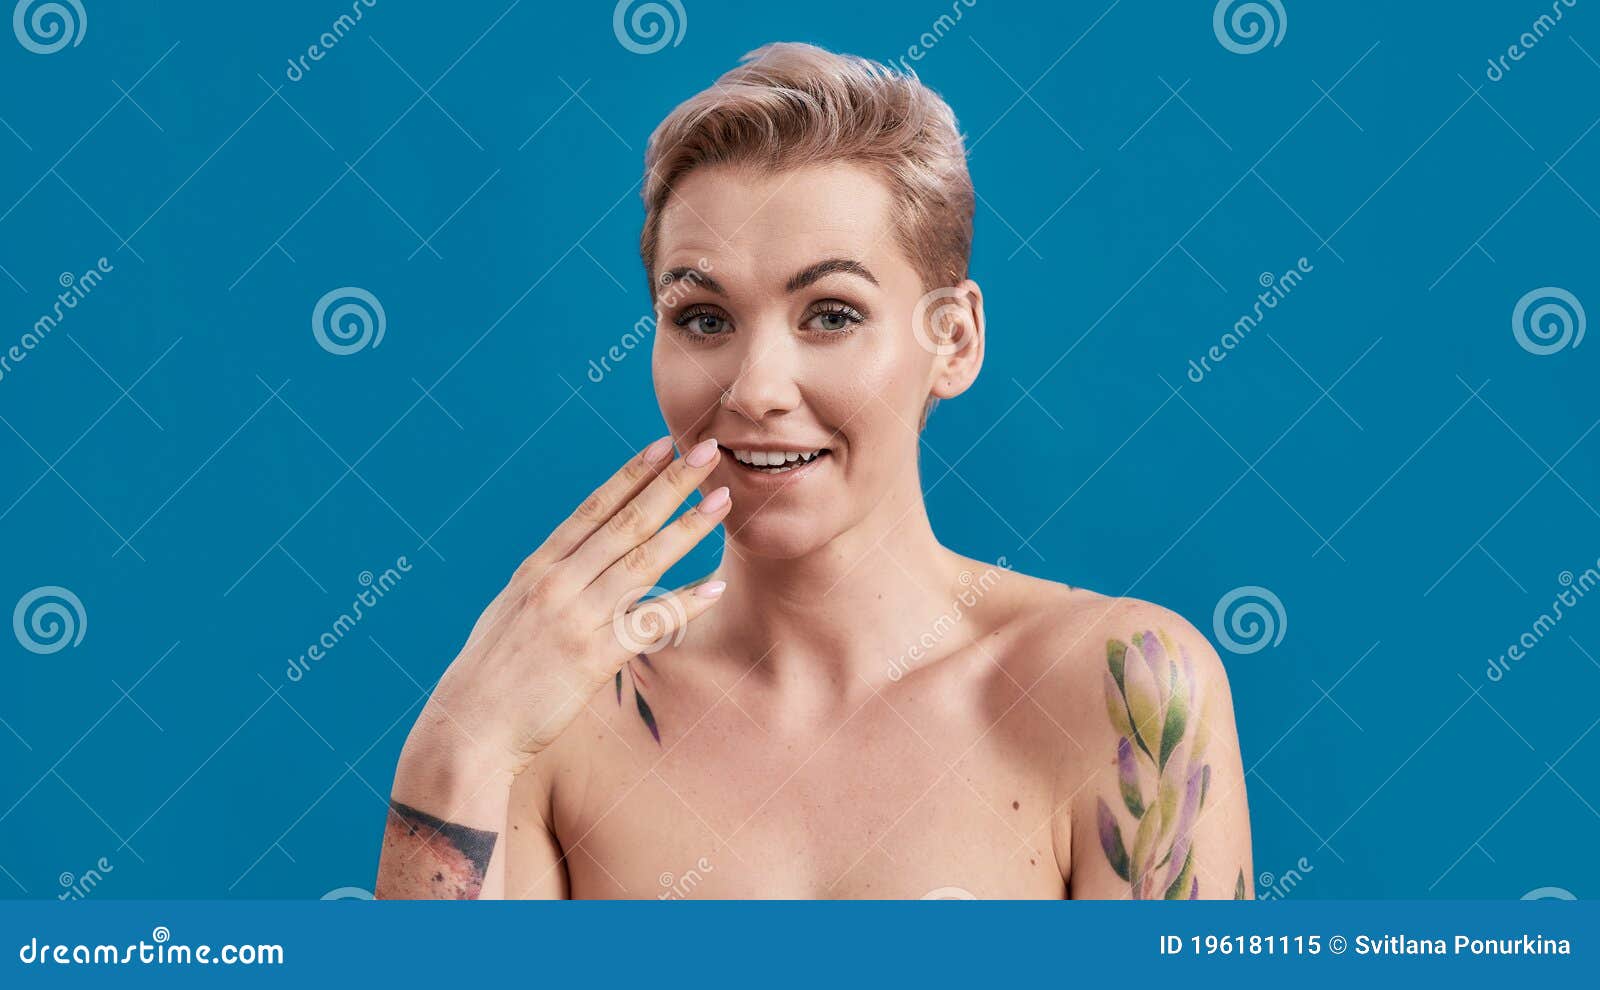 Beauty Portrait Of A Young Smiling Half Naked Woman Stock 